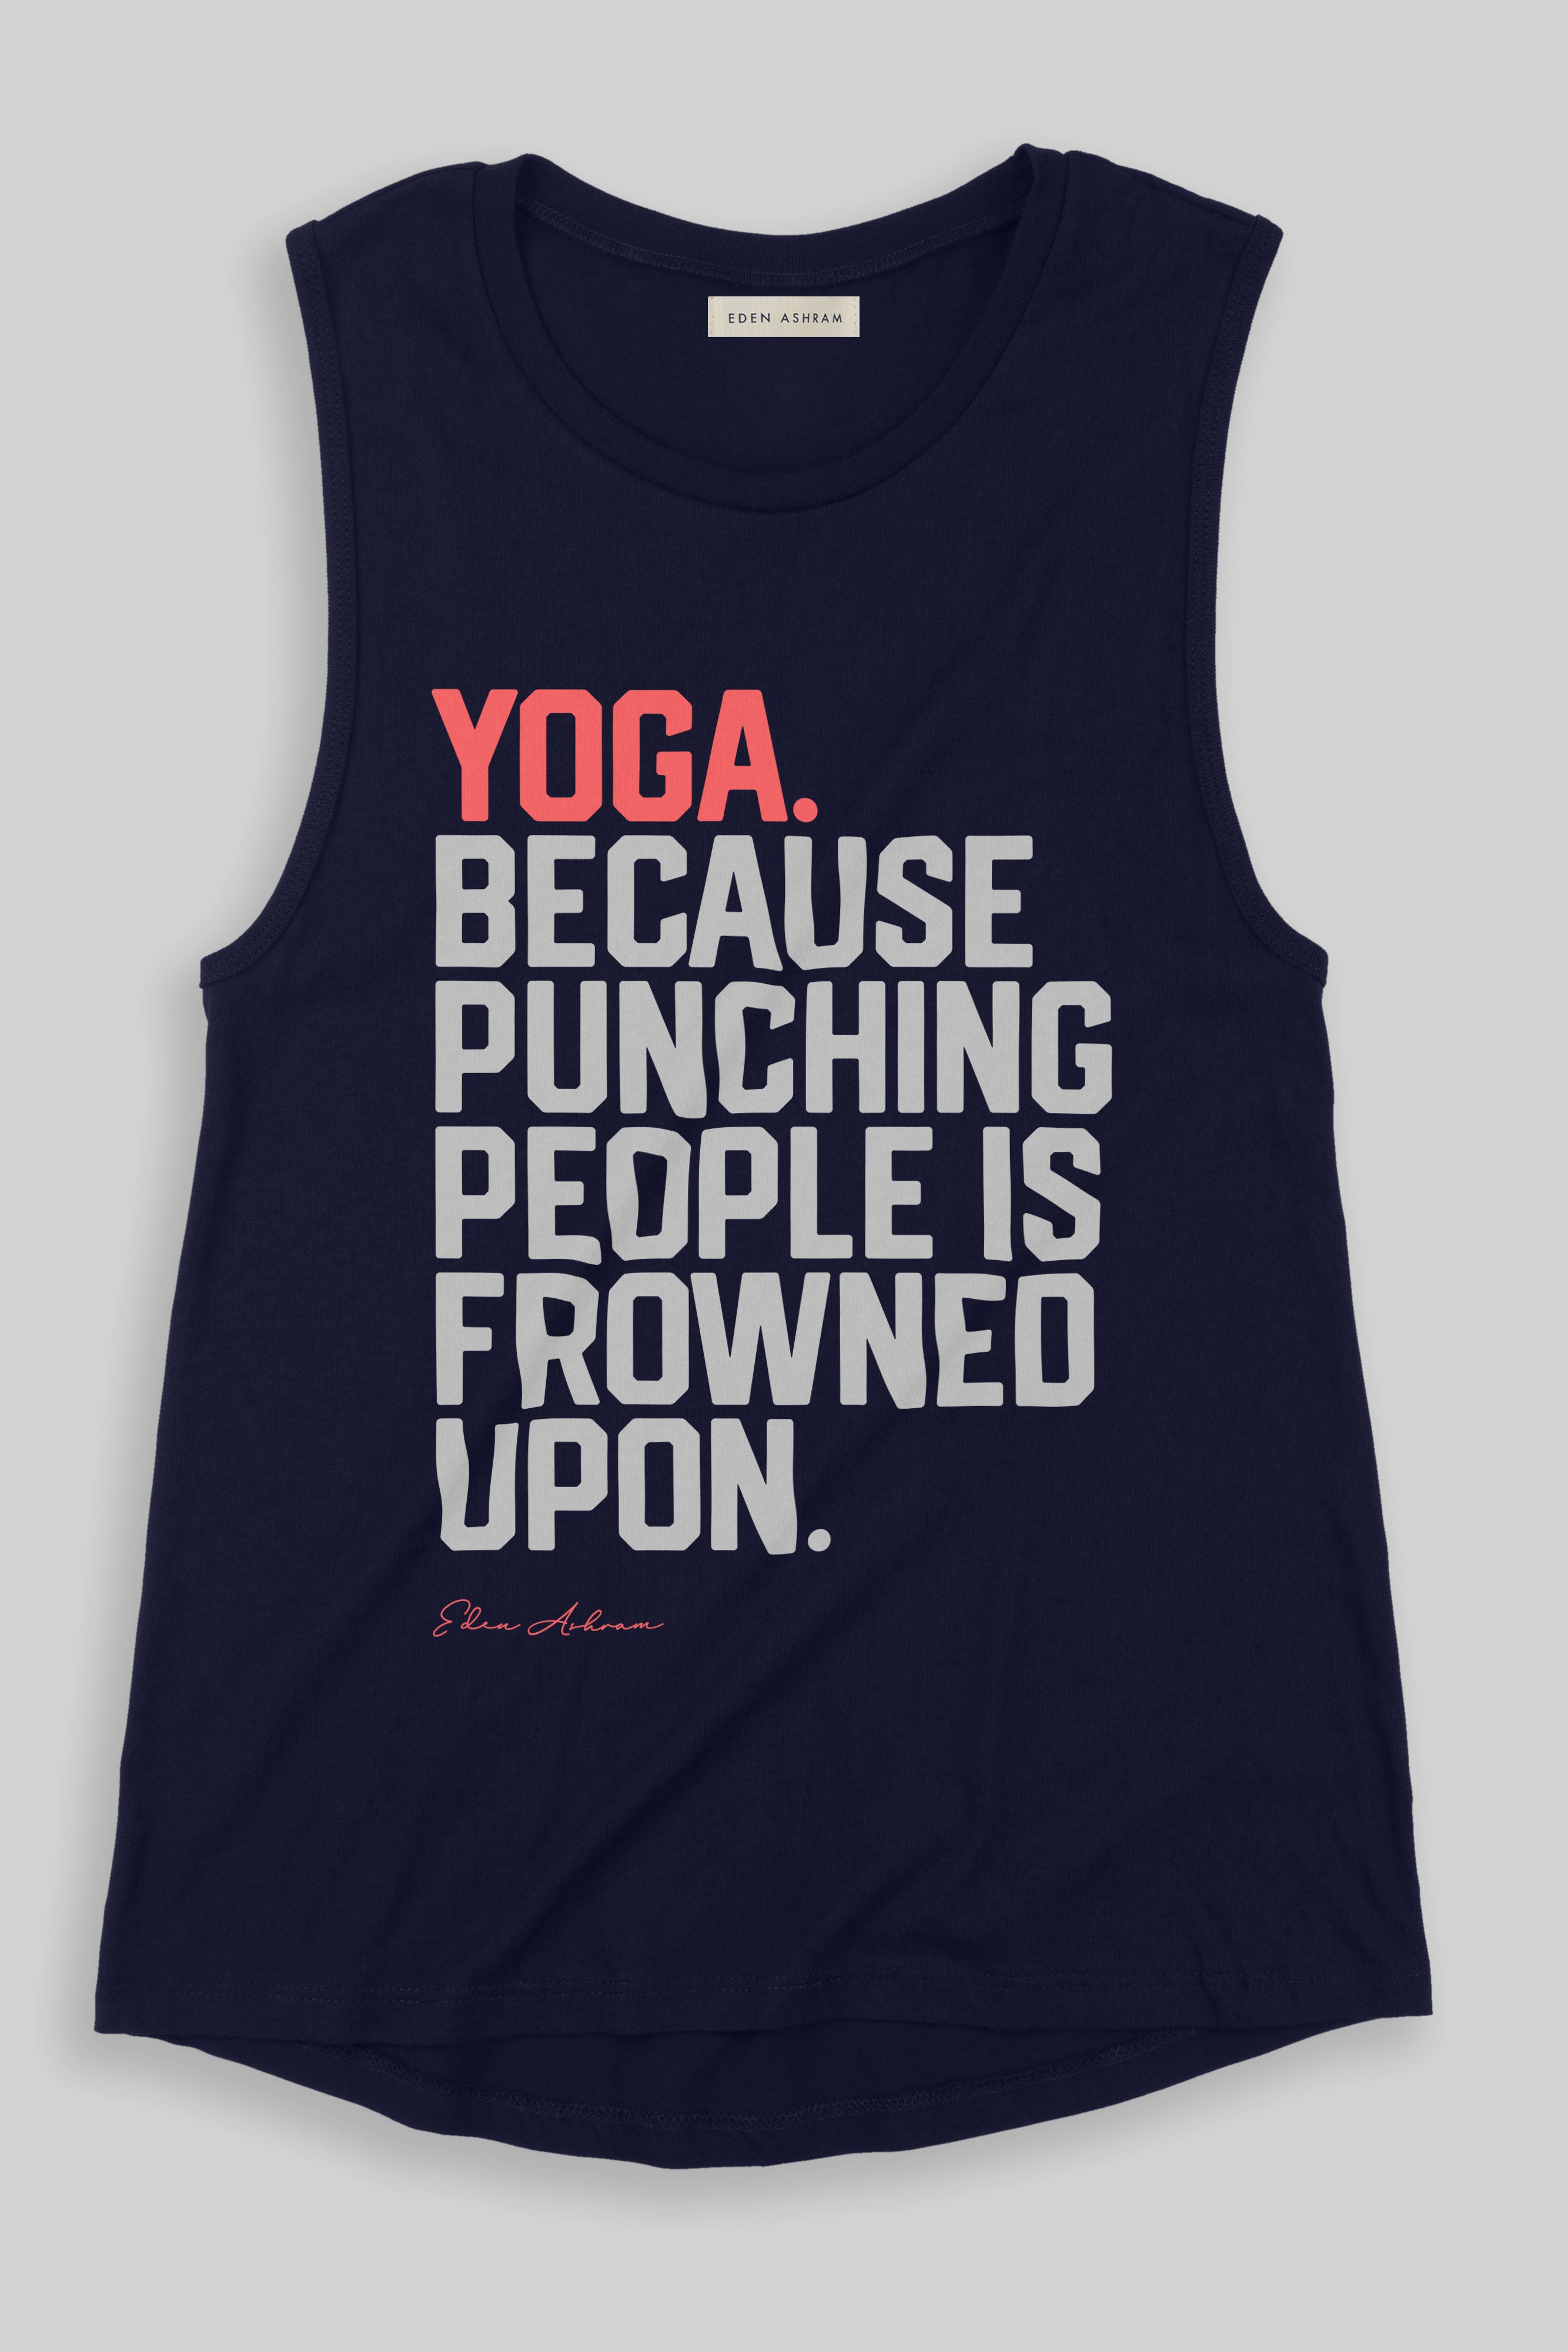 EDEN ASHRAM Yoga Because Punching People is Frowned Upon Jersey Muscle Tank